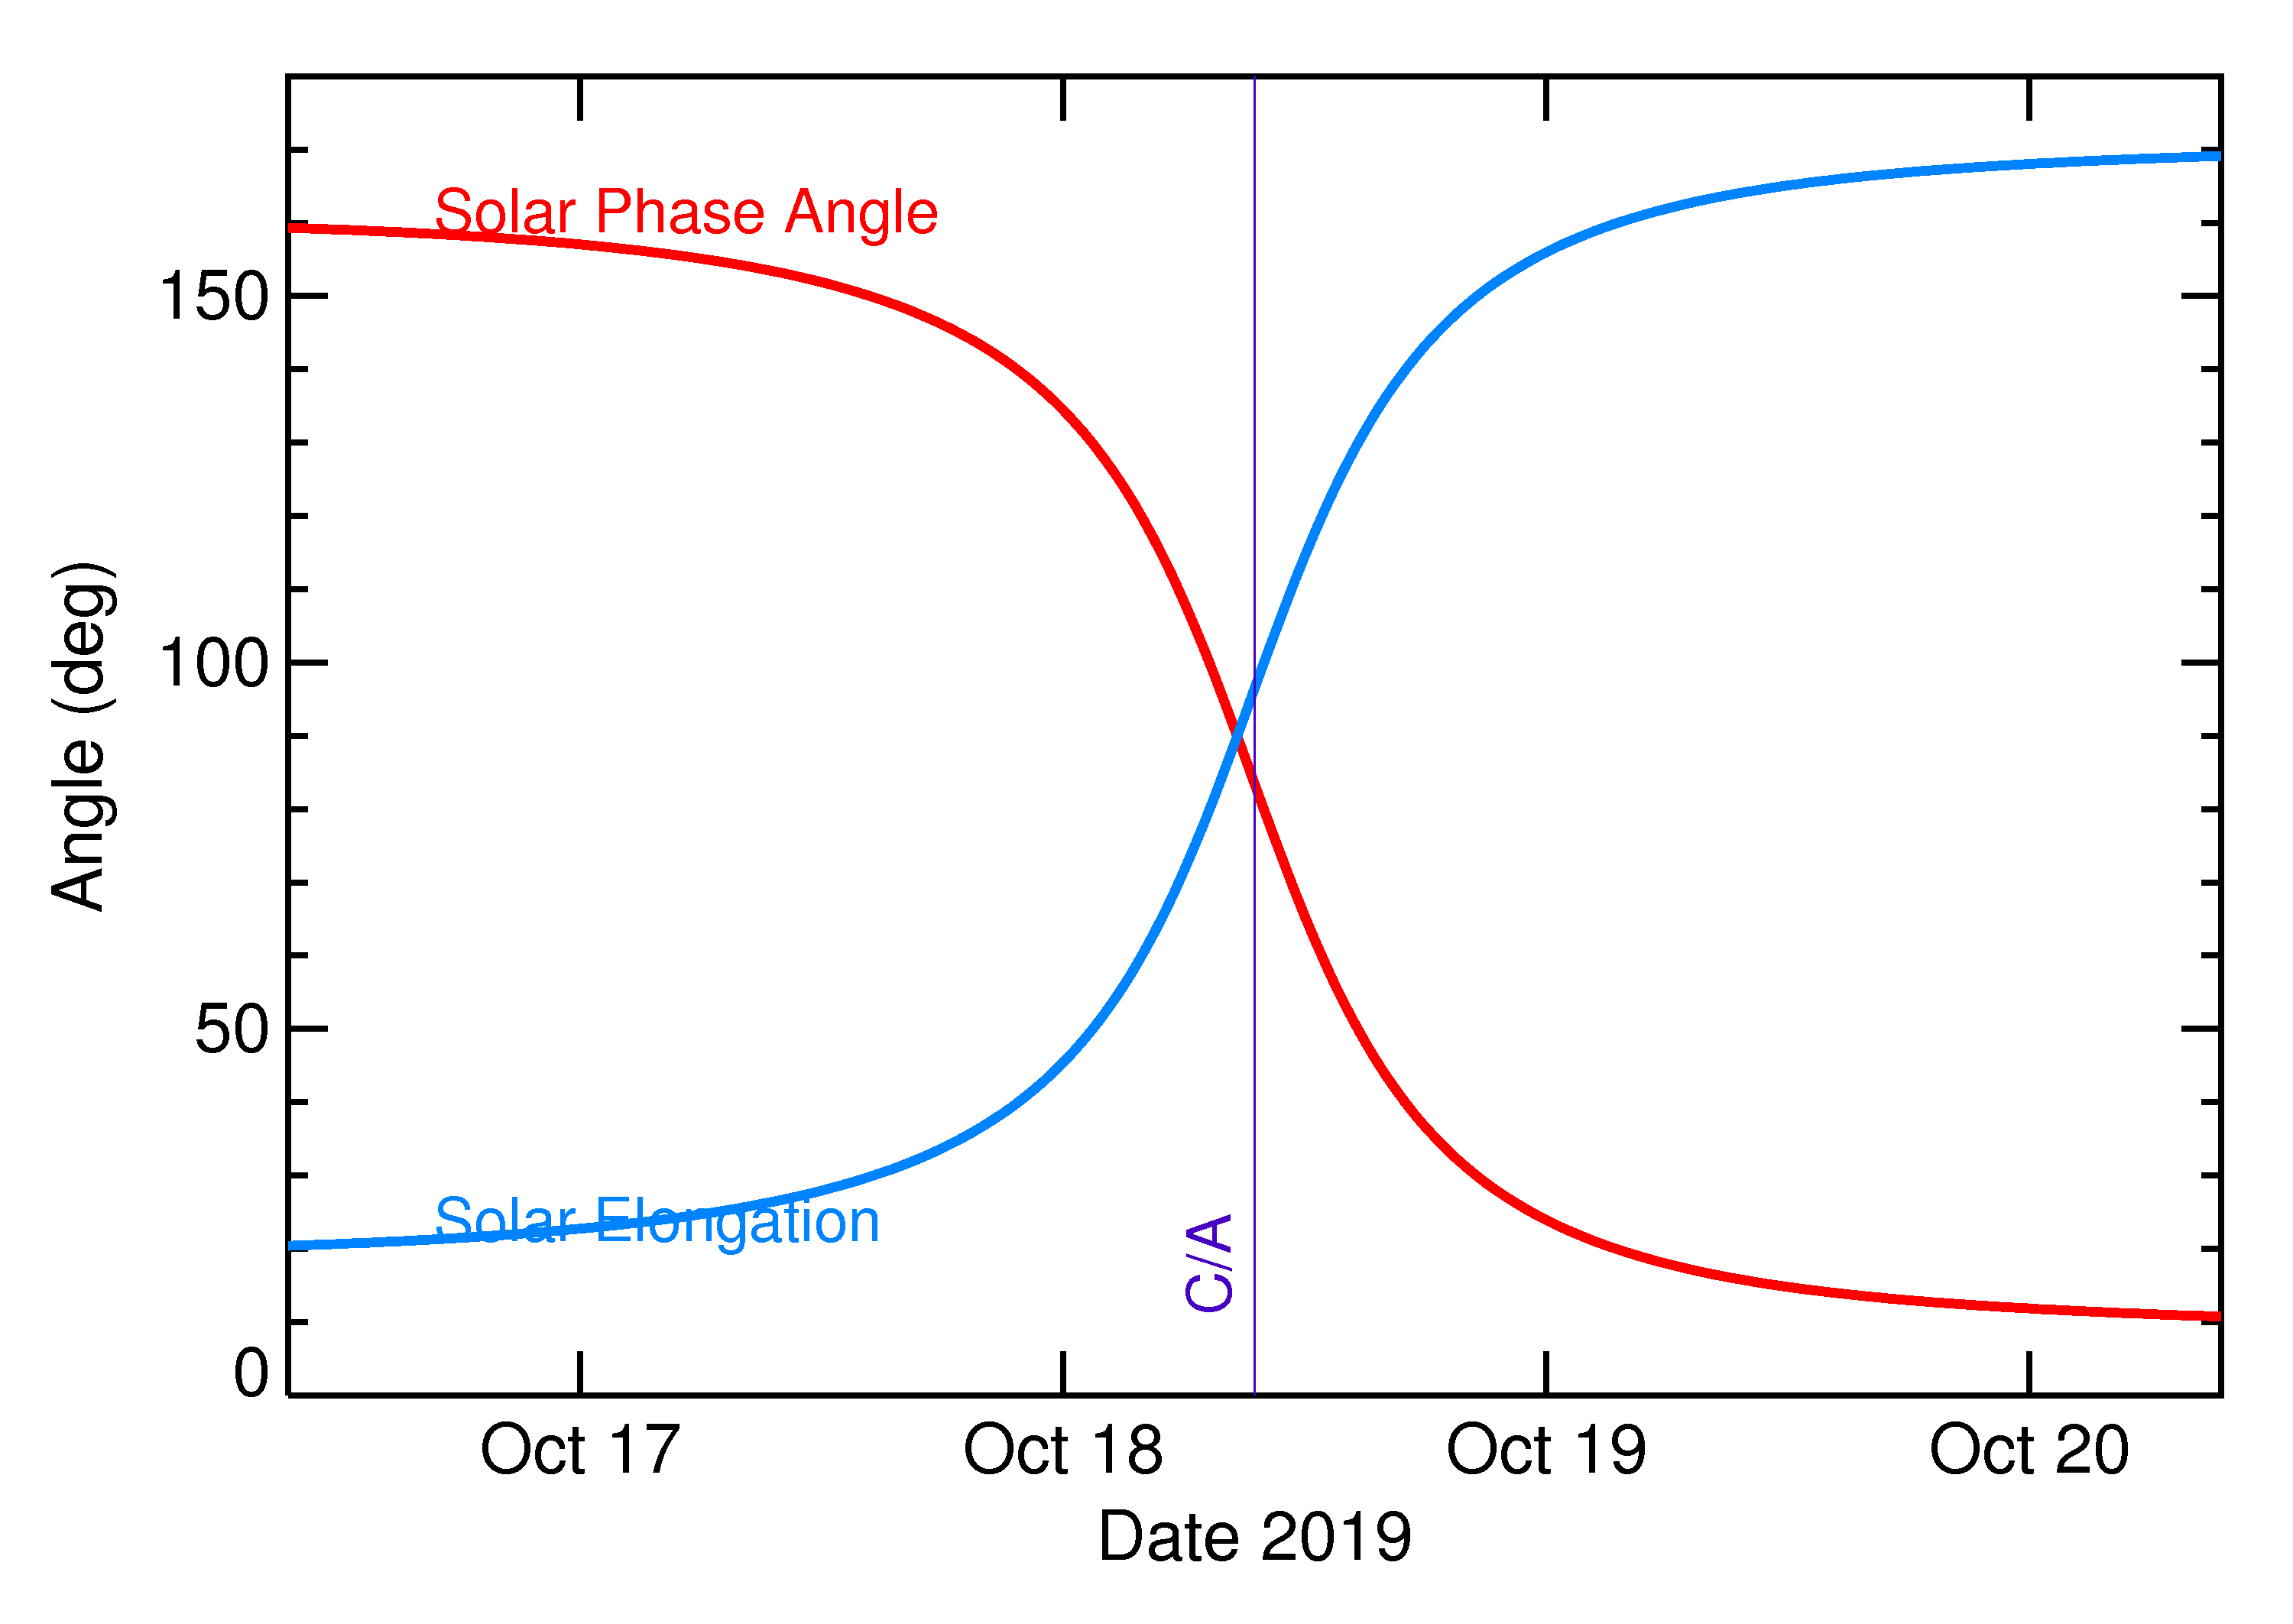 Solar Elongation and Solar Phase Angle of 2019 UG in the days around closest approach